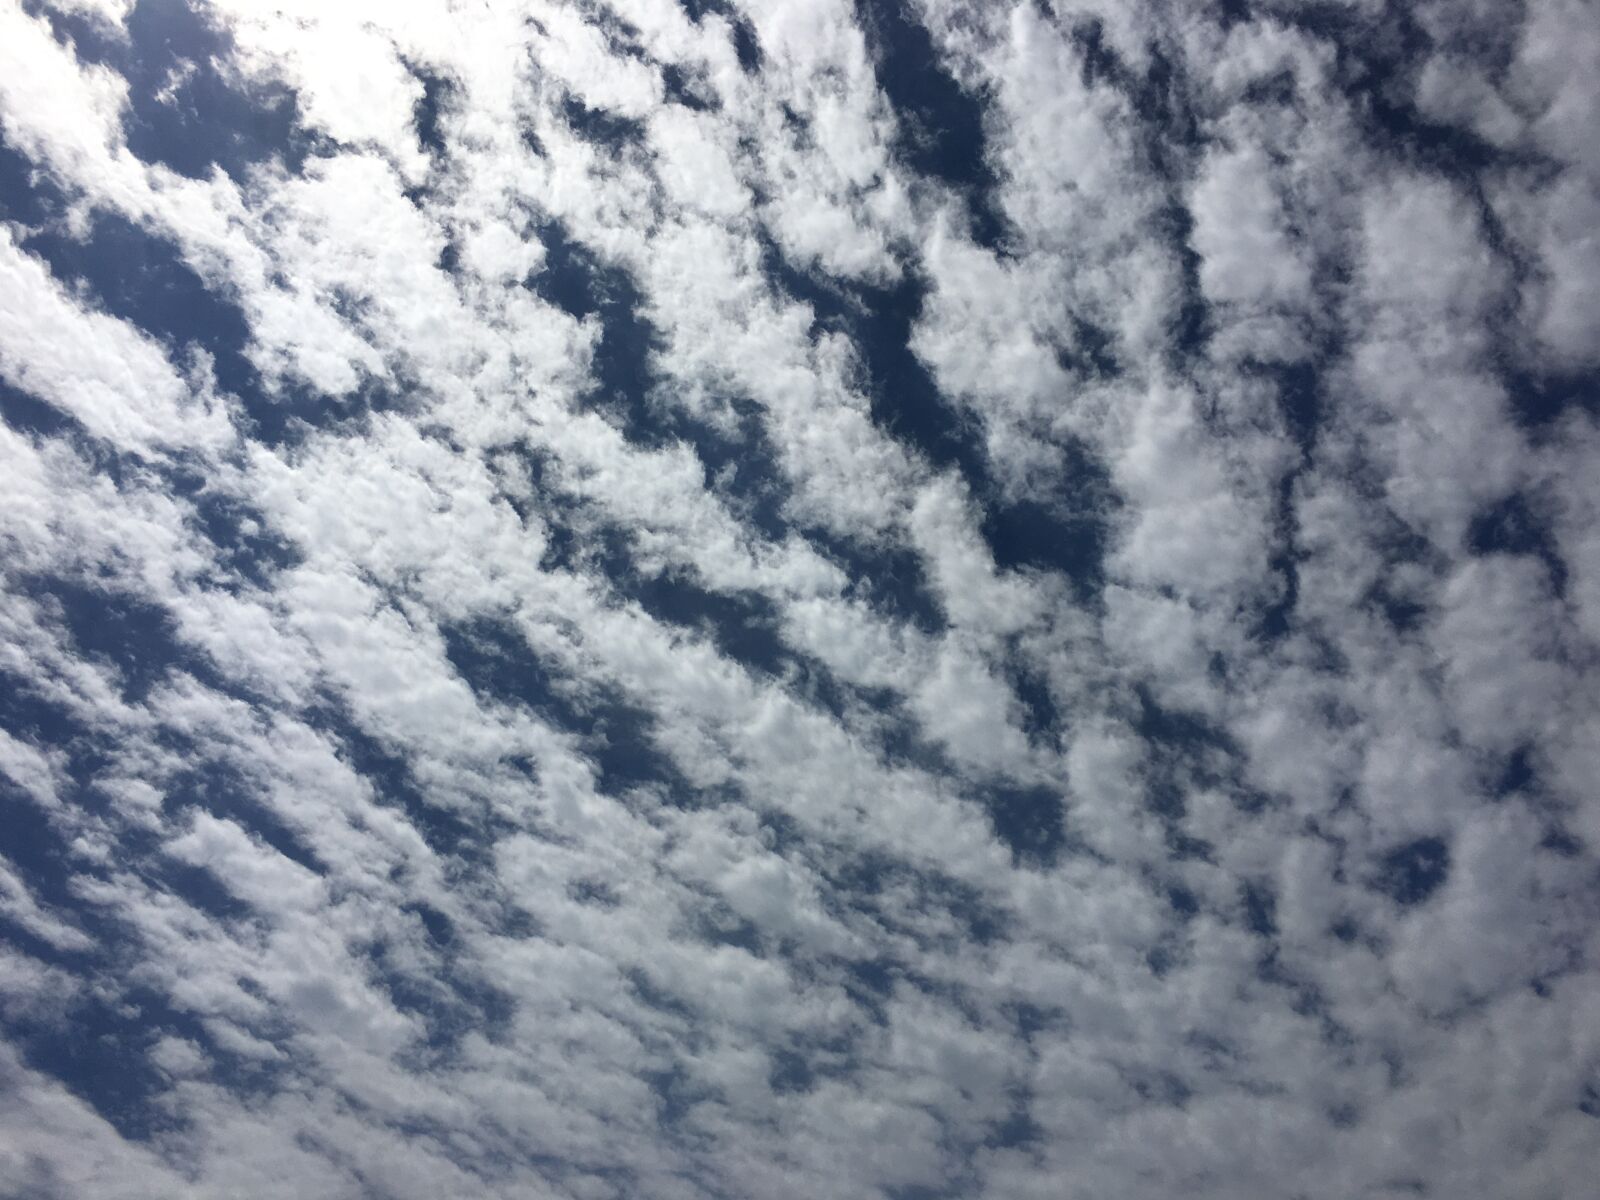 Apple iPhone 6s Plus sample photo. Clouds, sky, sky clouds photography